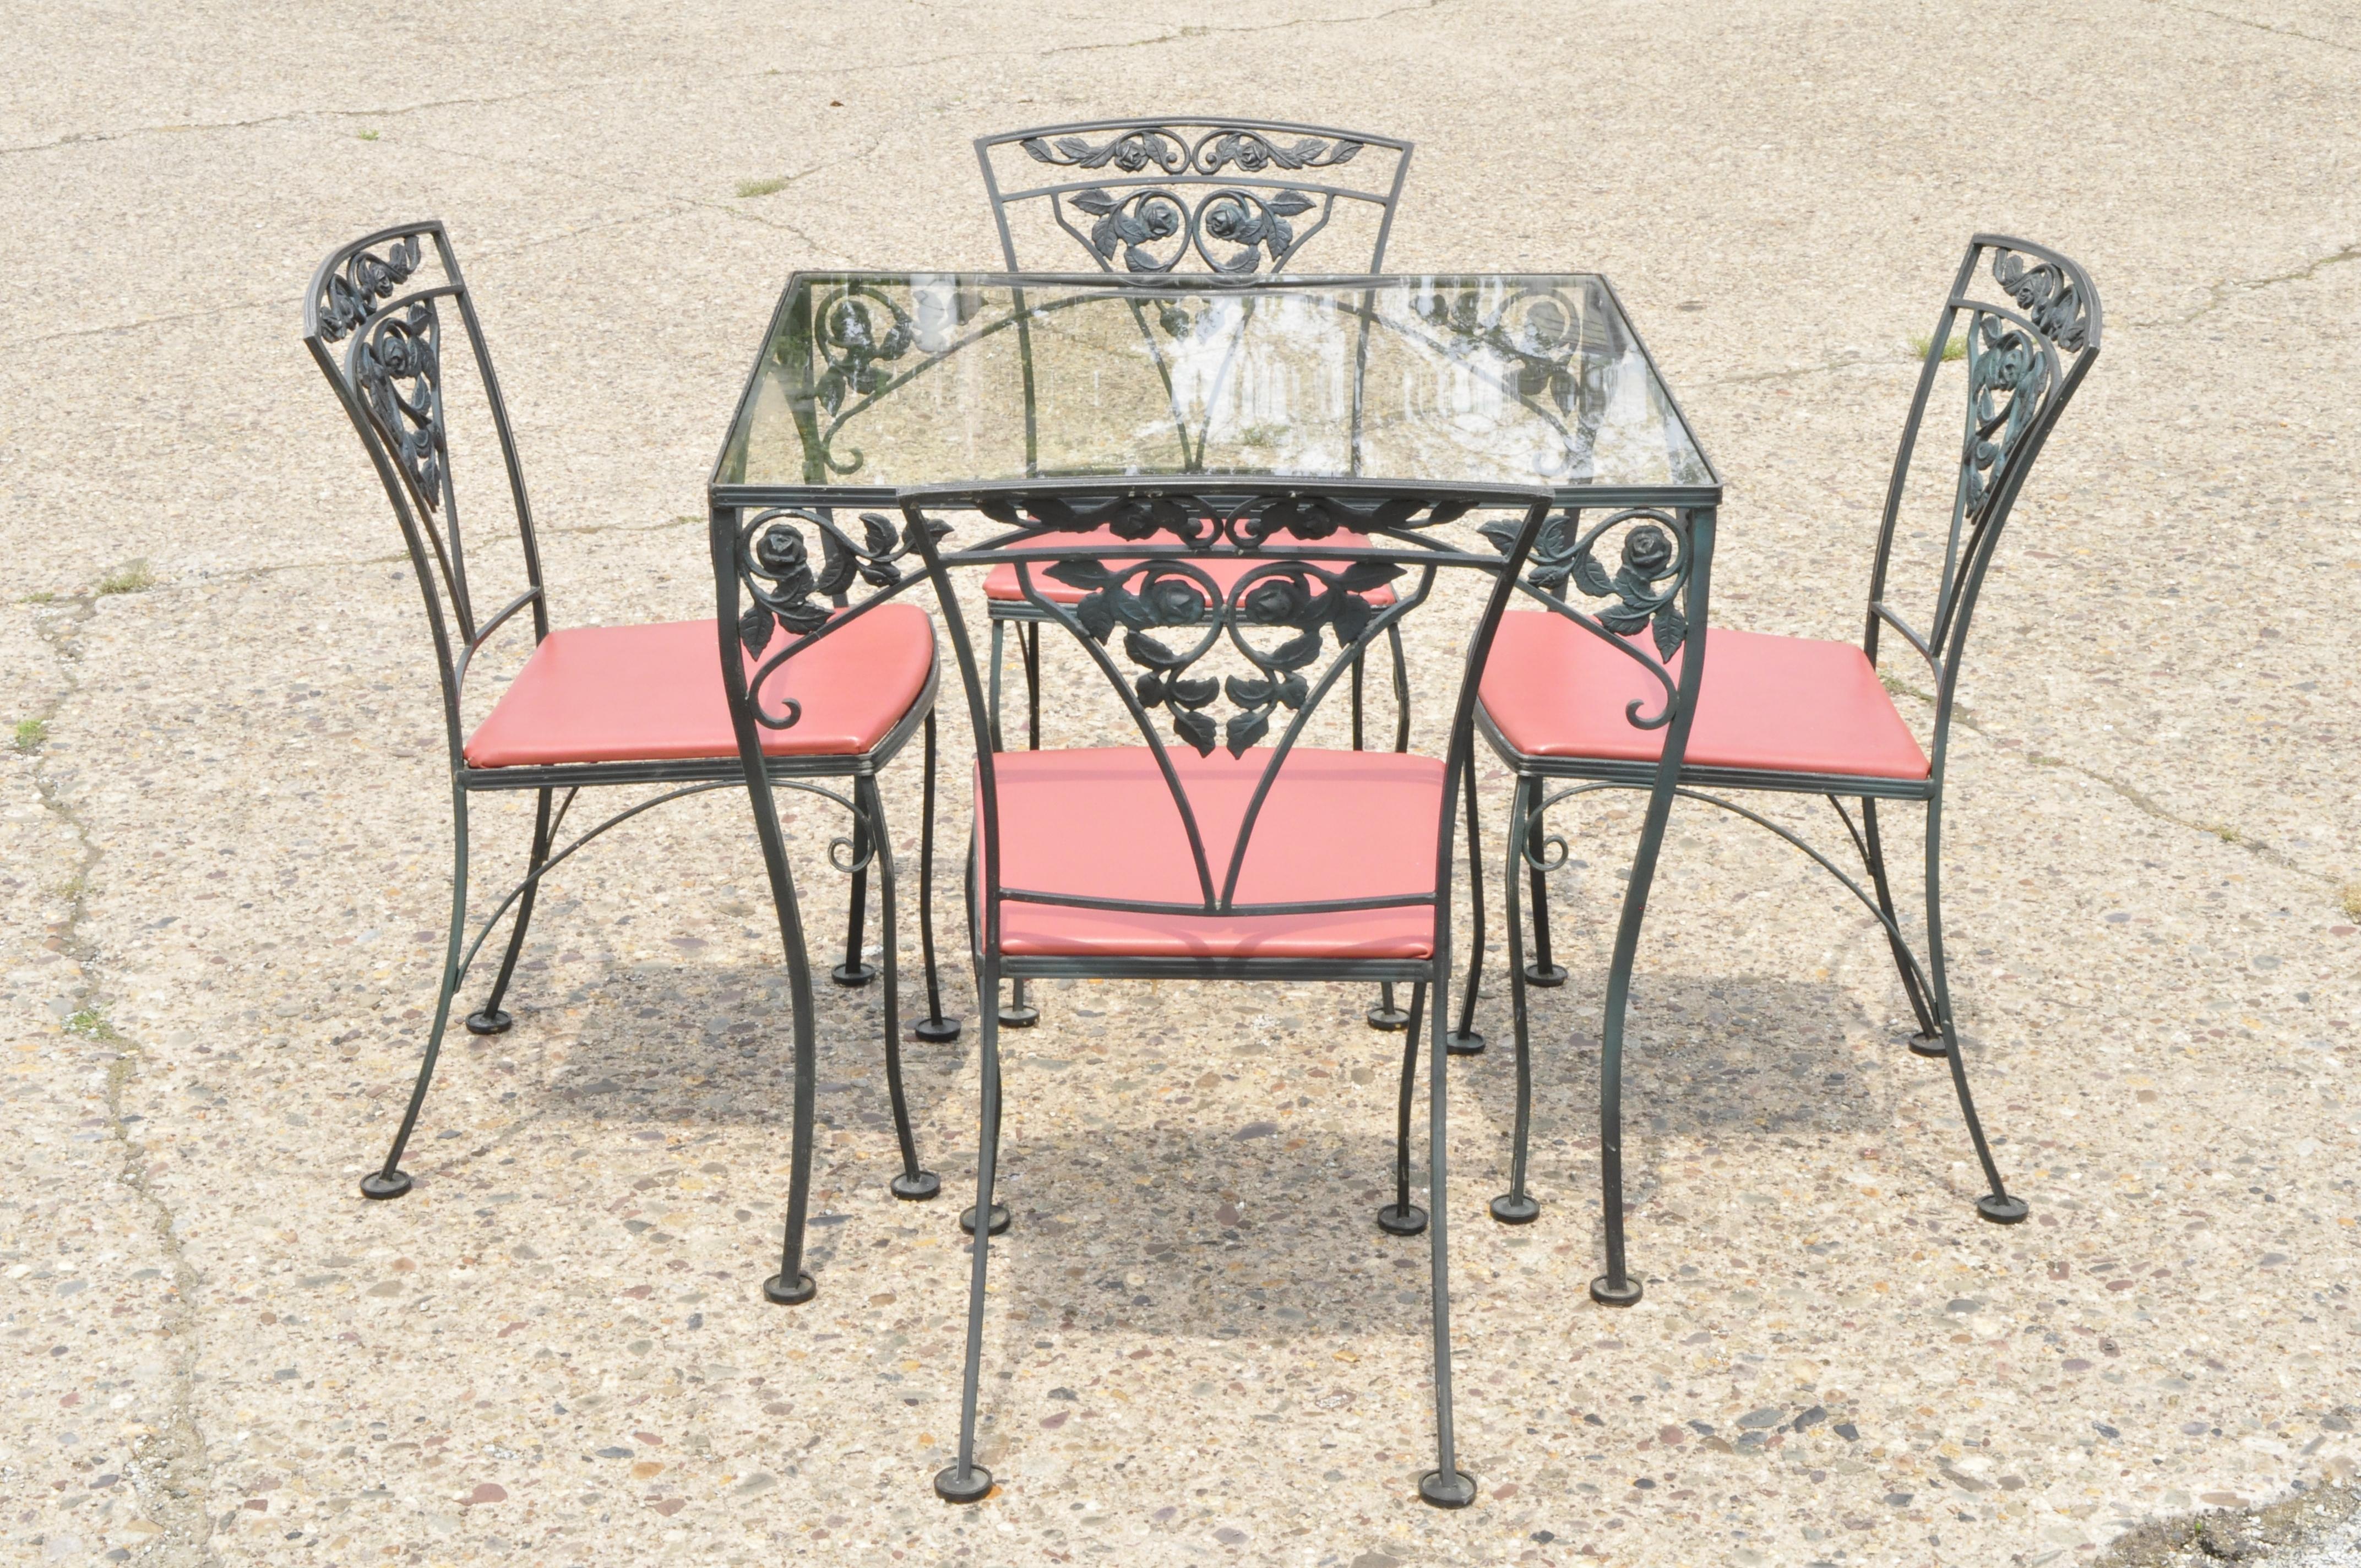 Woodard Chantilly Rose Green Garden Patio Dining Set of 4 Chairs & Square Table 2